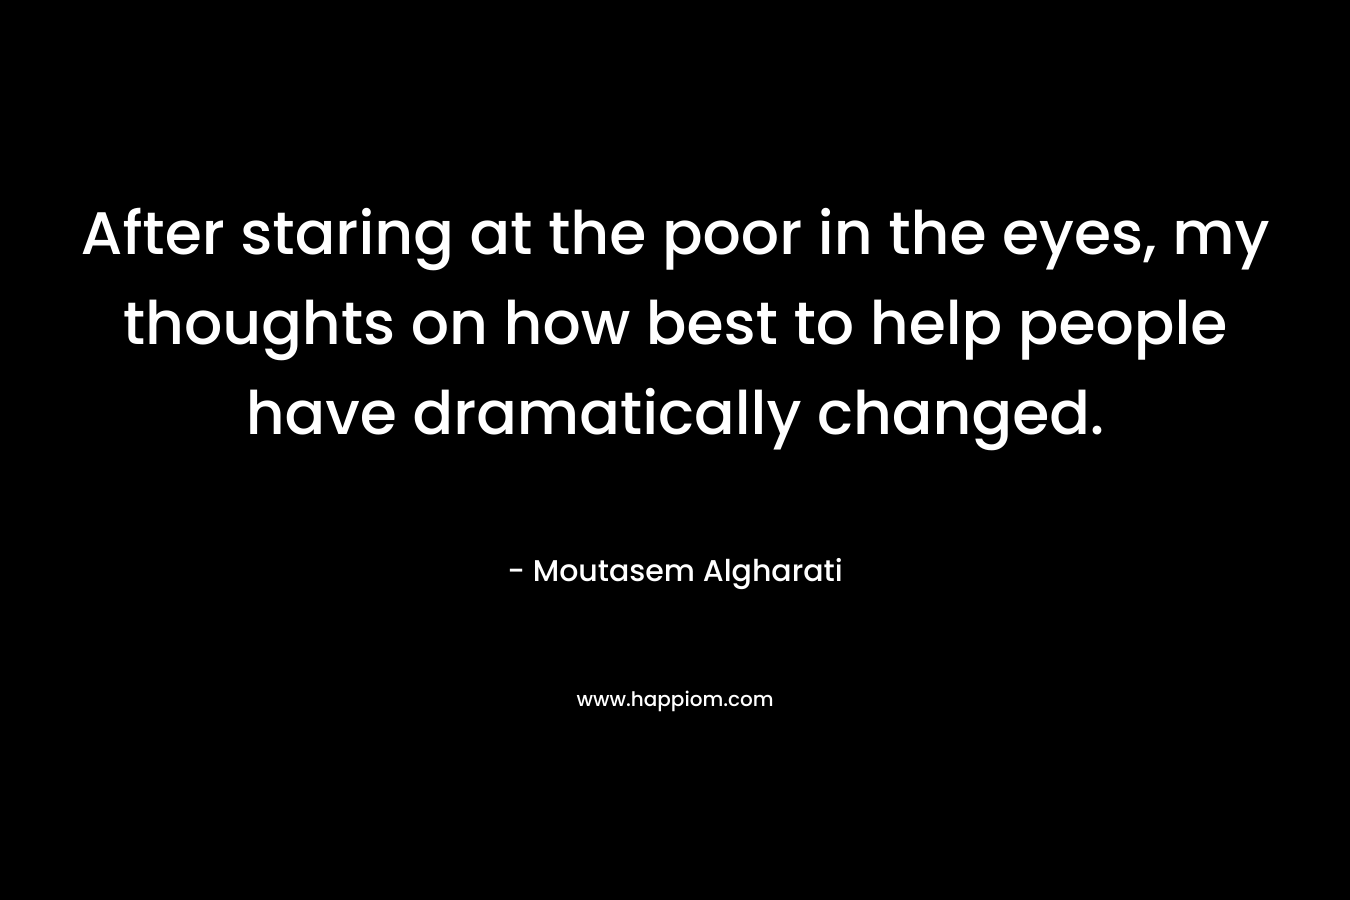 After staring at the poor in the eyes, my thoughts on how best to help people have dramatically changed.